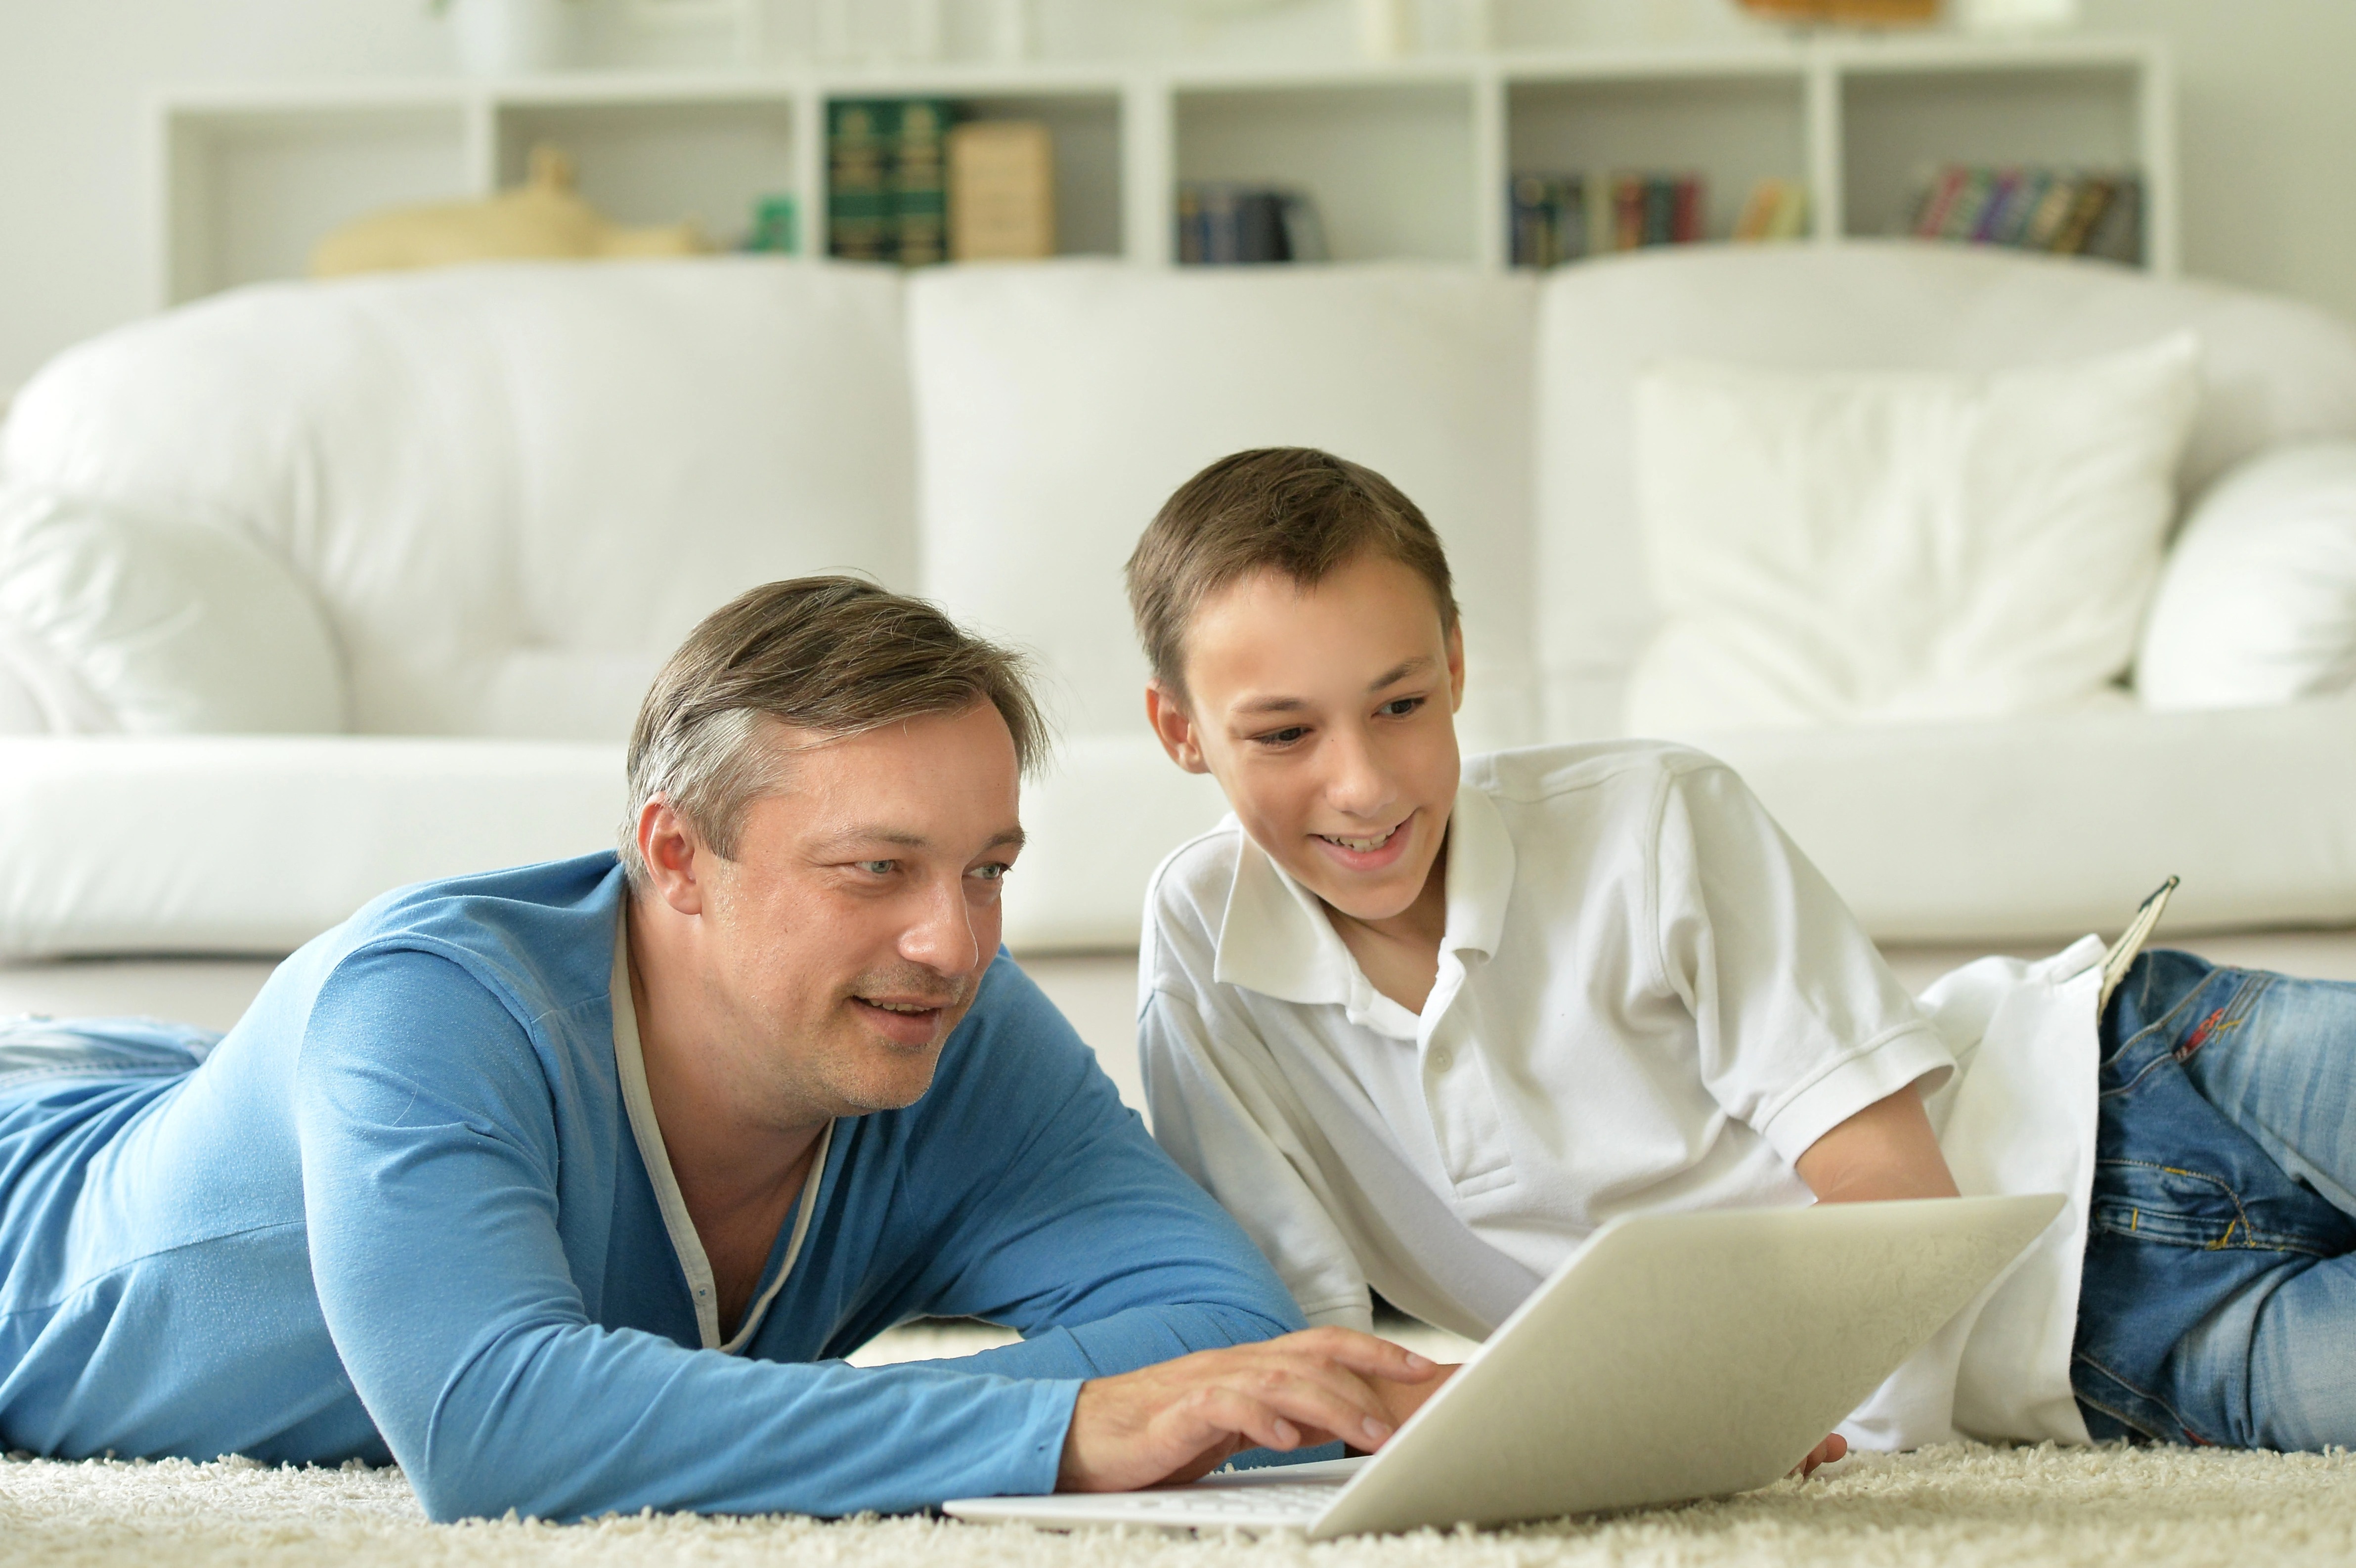 Man typing on laptop on the floor with a boy smiling